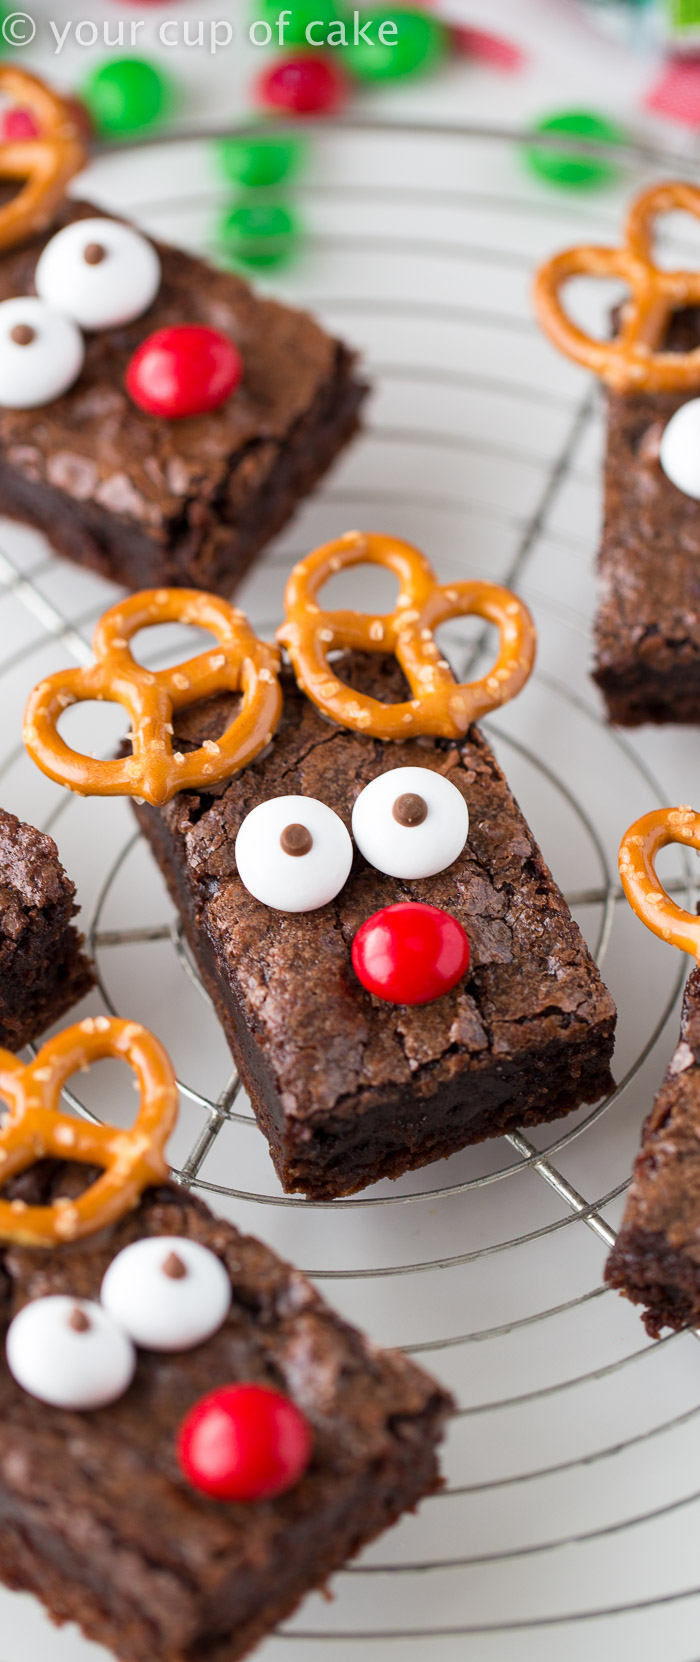 https://www.yourcupofcake.com/wp-content/uploads/2016/12/Rudolph-Brownies-for-Christmas-2.jpg